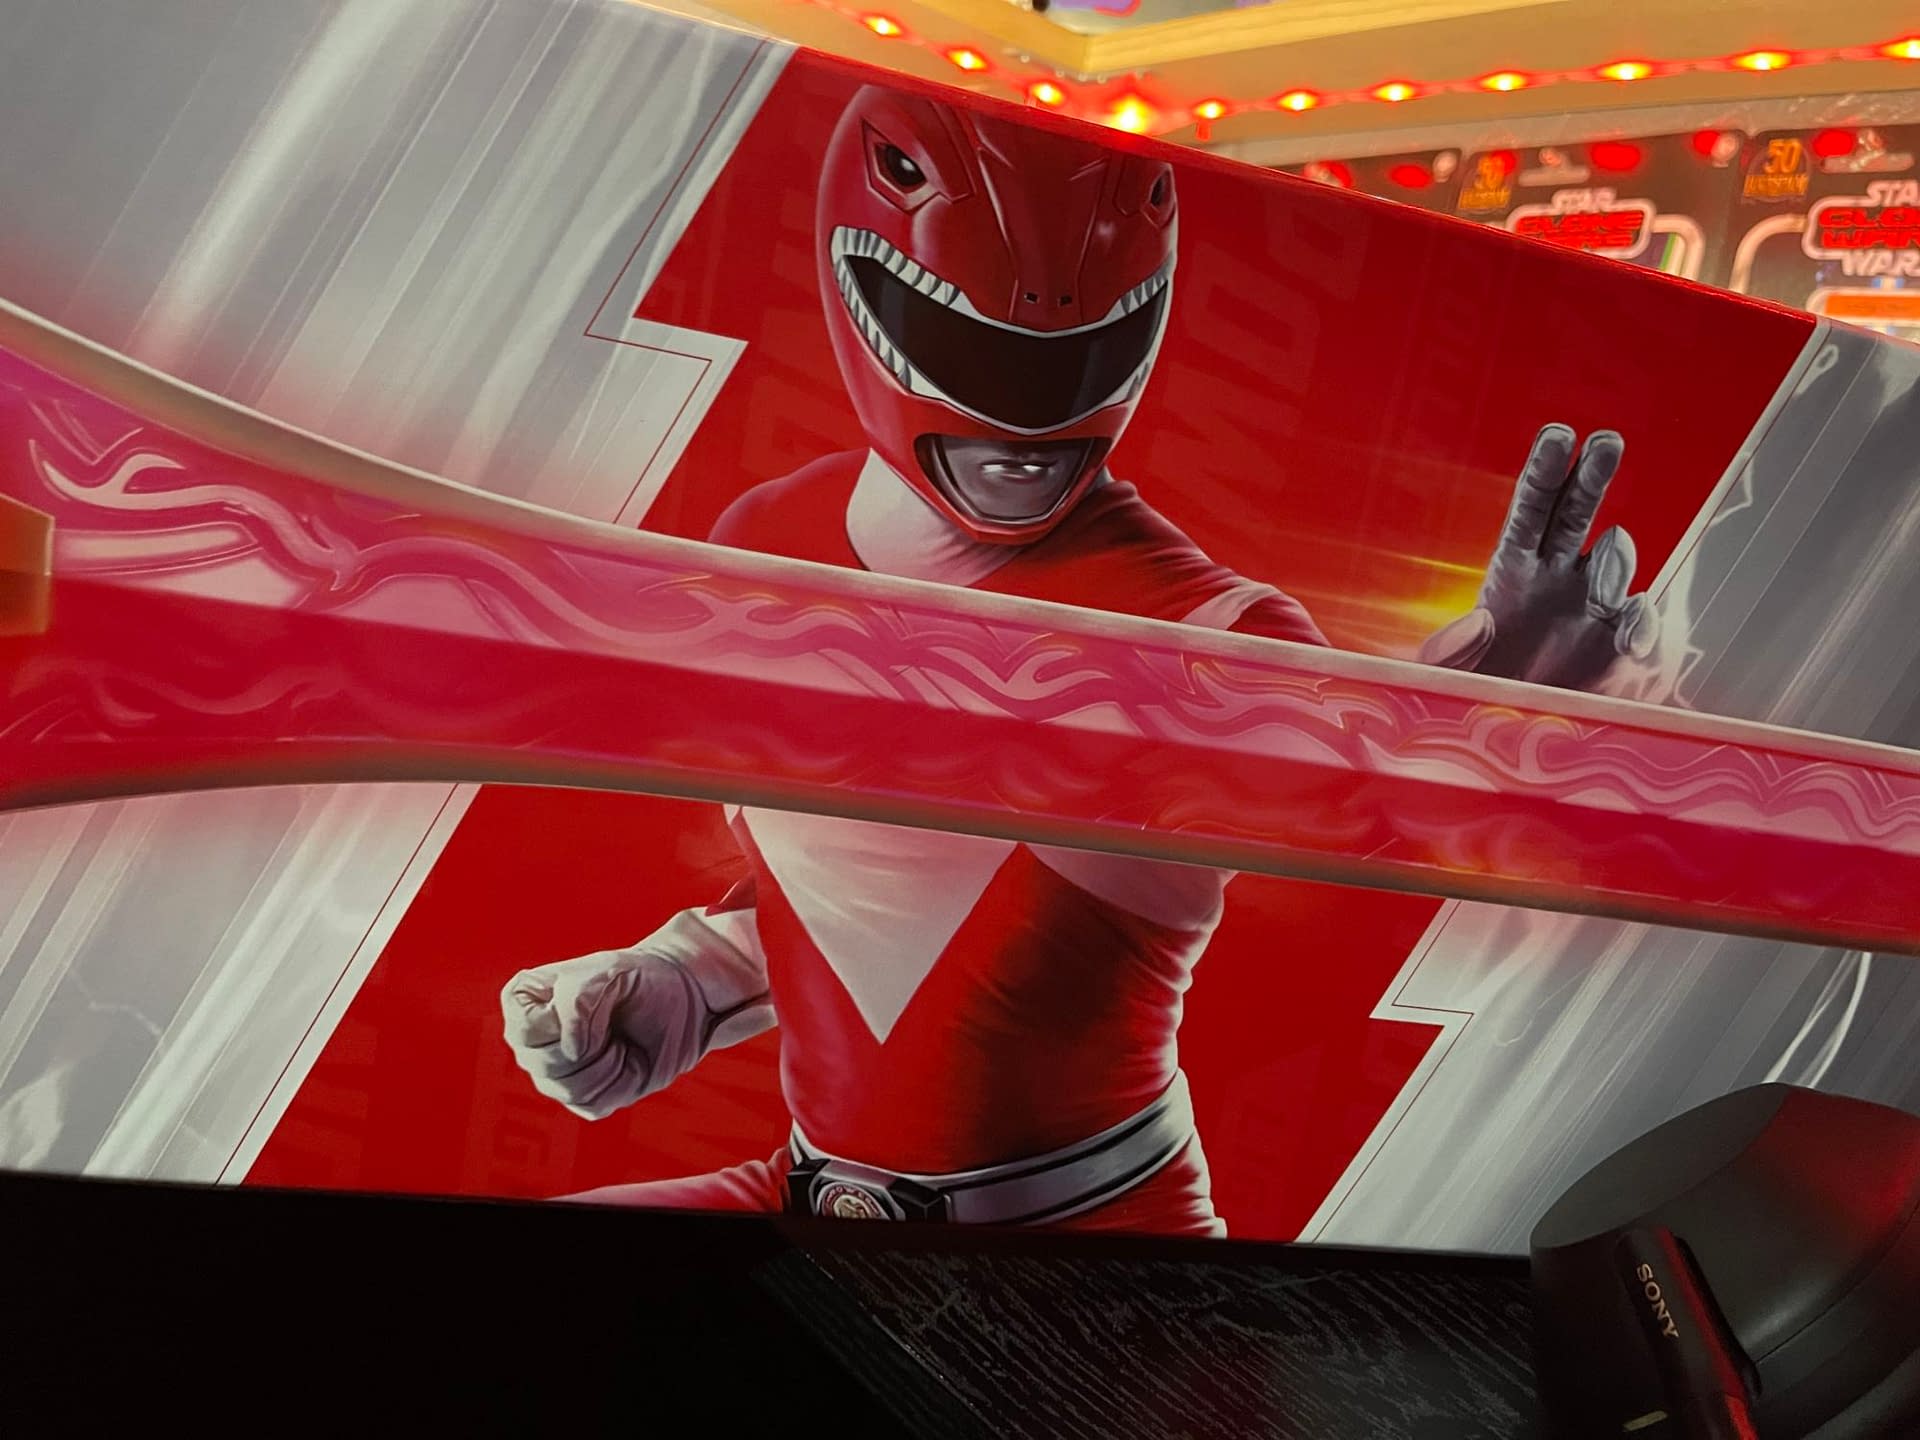 Power Rangers Red Ranger Power Sword Makes the Show a Reality 